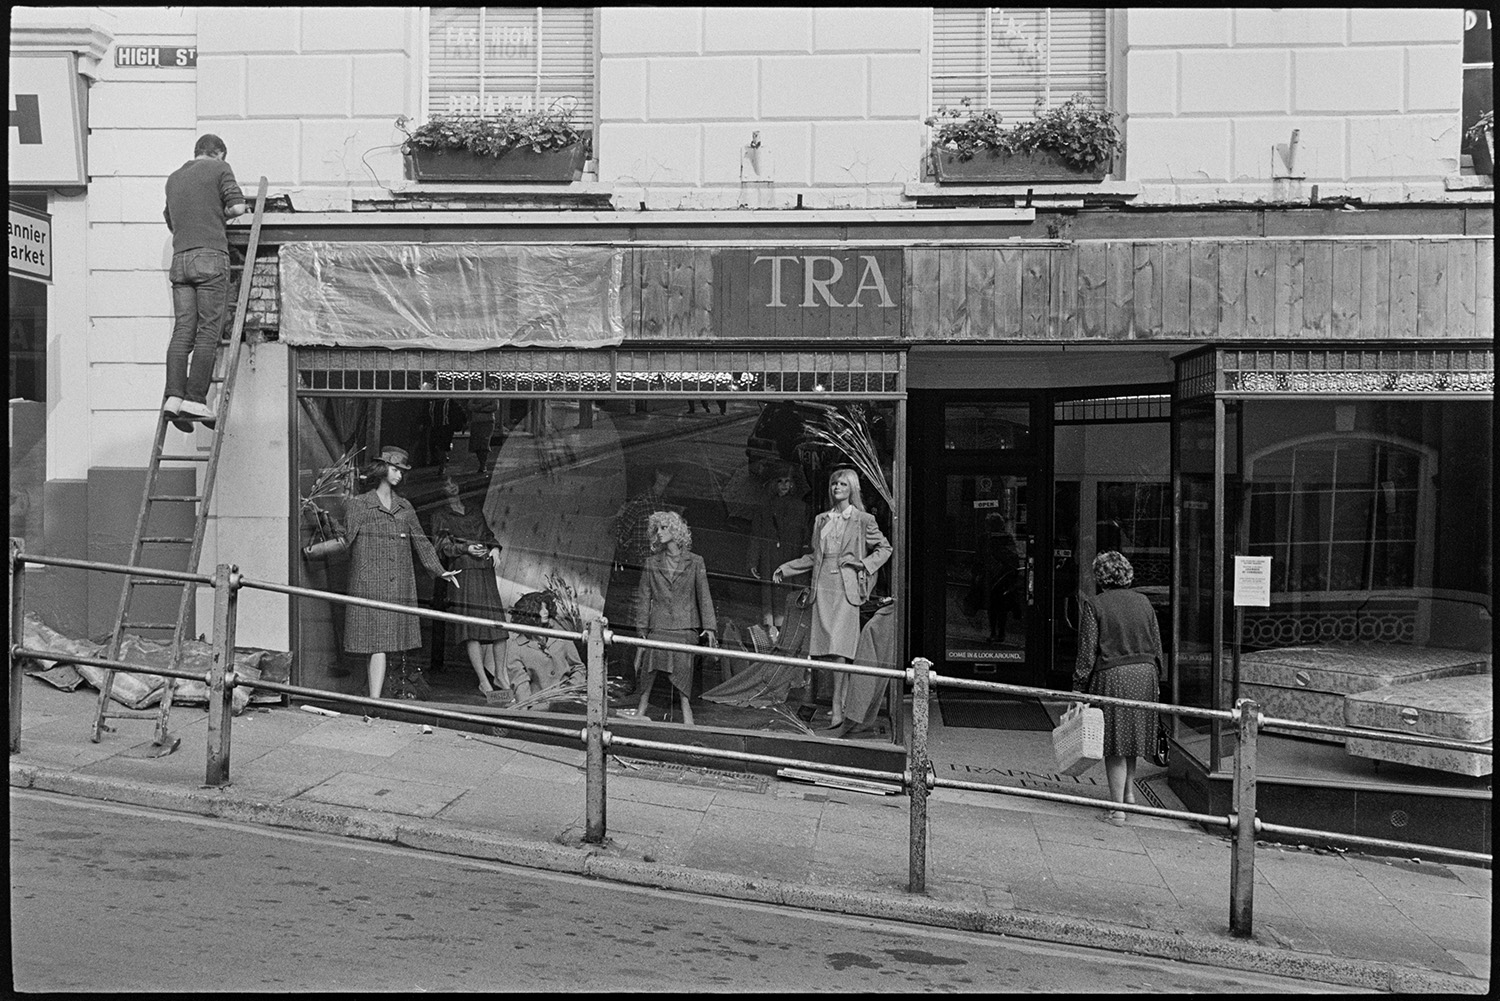 Front of clothes shop being repaired shortly before it closed. 
[The front of Trapnells clothes shop being renovated shortly before the shop closed, in Bideford High Street. A man is up a ladder working on the shop sign. Mannequins modelling clothes can be seen in the shop front window and a woman is walking into the shop.]